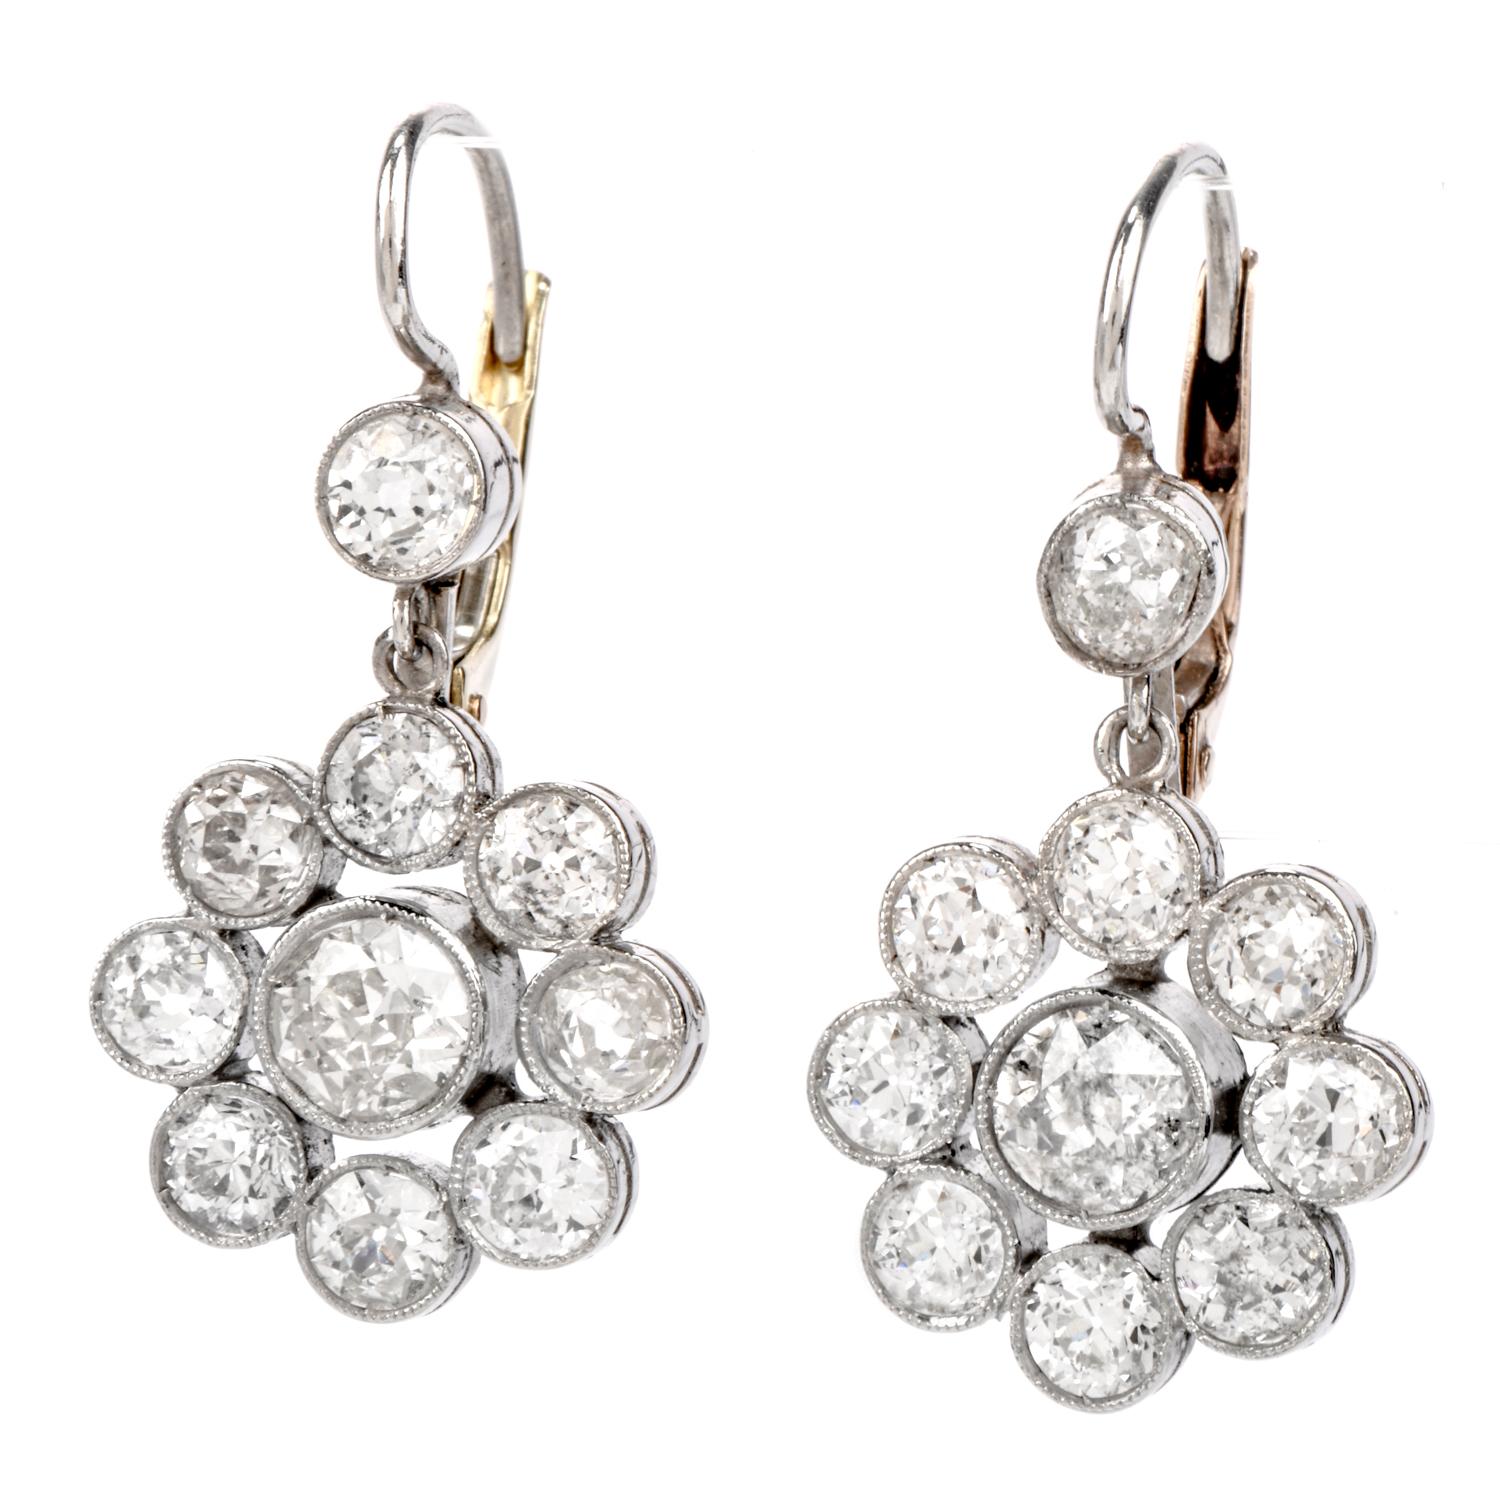 Accent your look with the exquisite Pristine Condition Floral

Designed cluster earrings crafted in Platinum.

earrings consists of a 18-0ld European-cut diamond floral cluster suspended

Form a single diamond at the base of the Earoclip hoop.

The